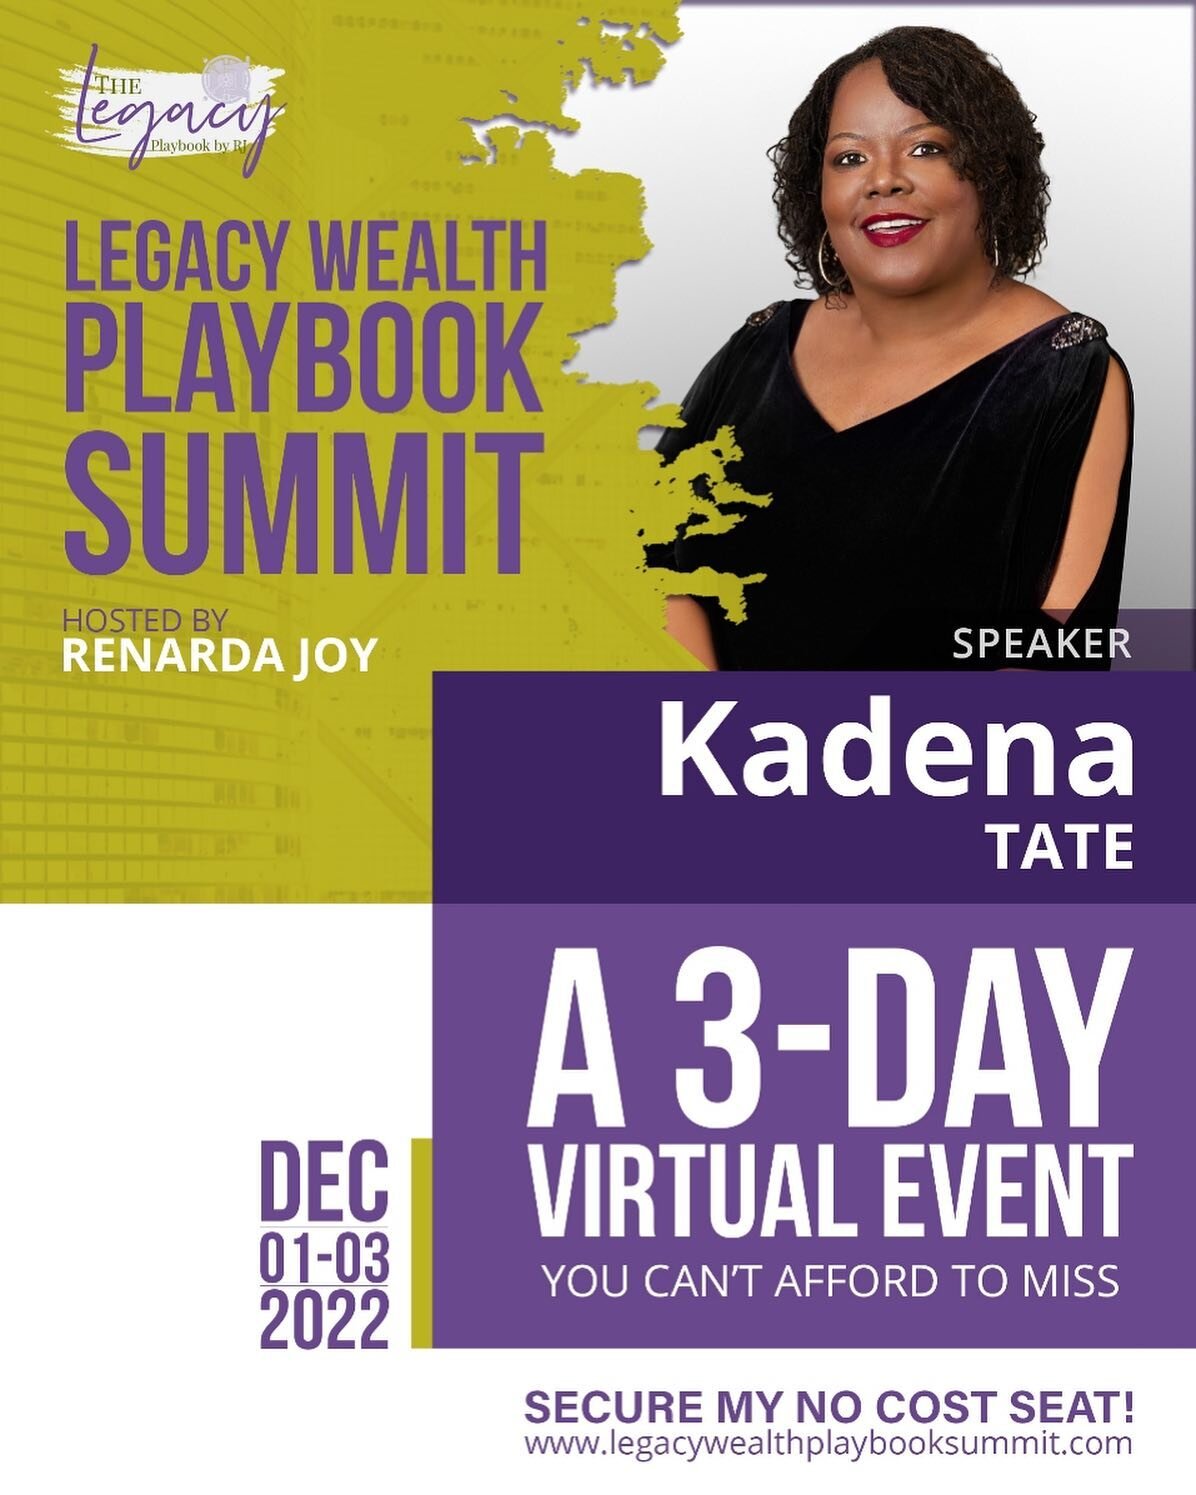 IT&rsquo;S DECEMBER 2nd!

Where will you be?

On your mark, get set.... oh, wait! 

Inhale some exciting air as we welcome you to join us TODAY at The Legacy Wealth Playbook Summit.

The Legacy Wealth Playbook Summit isn't just focused on wealth crea